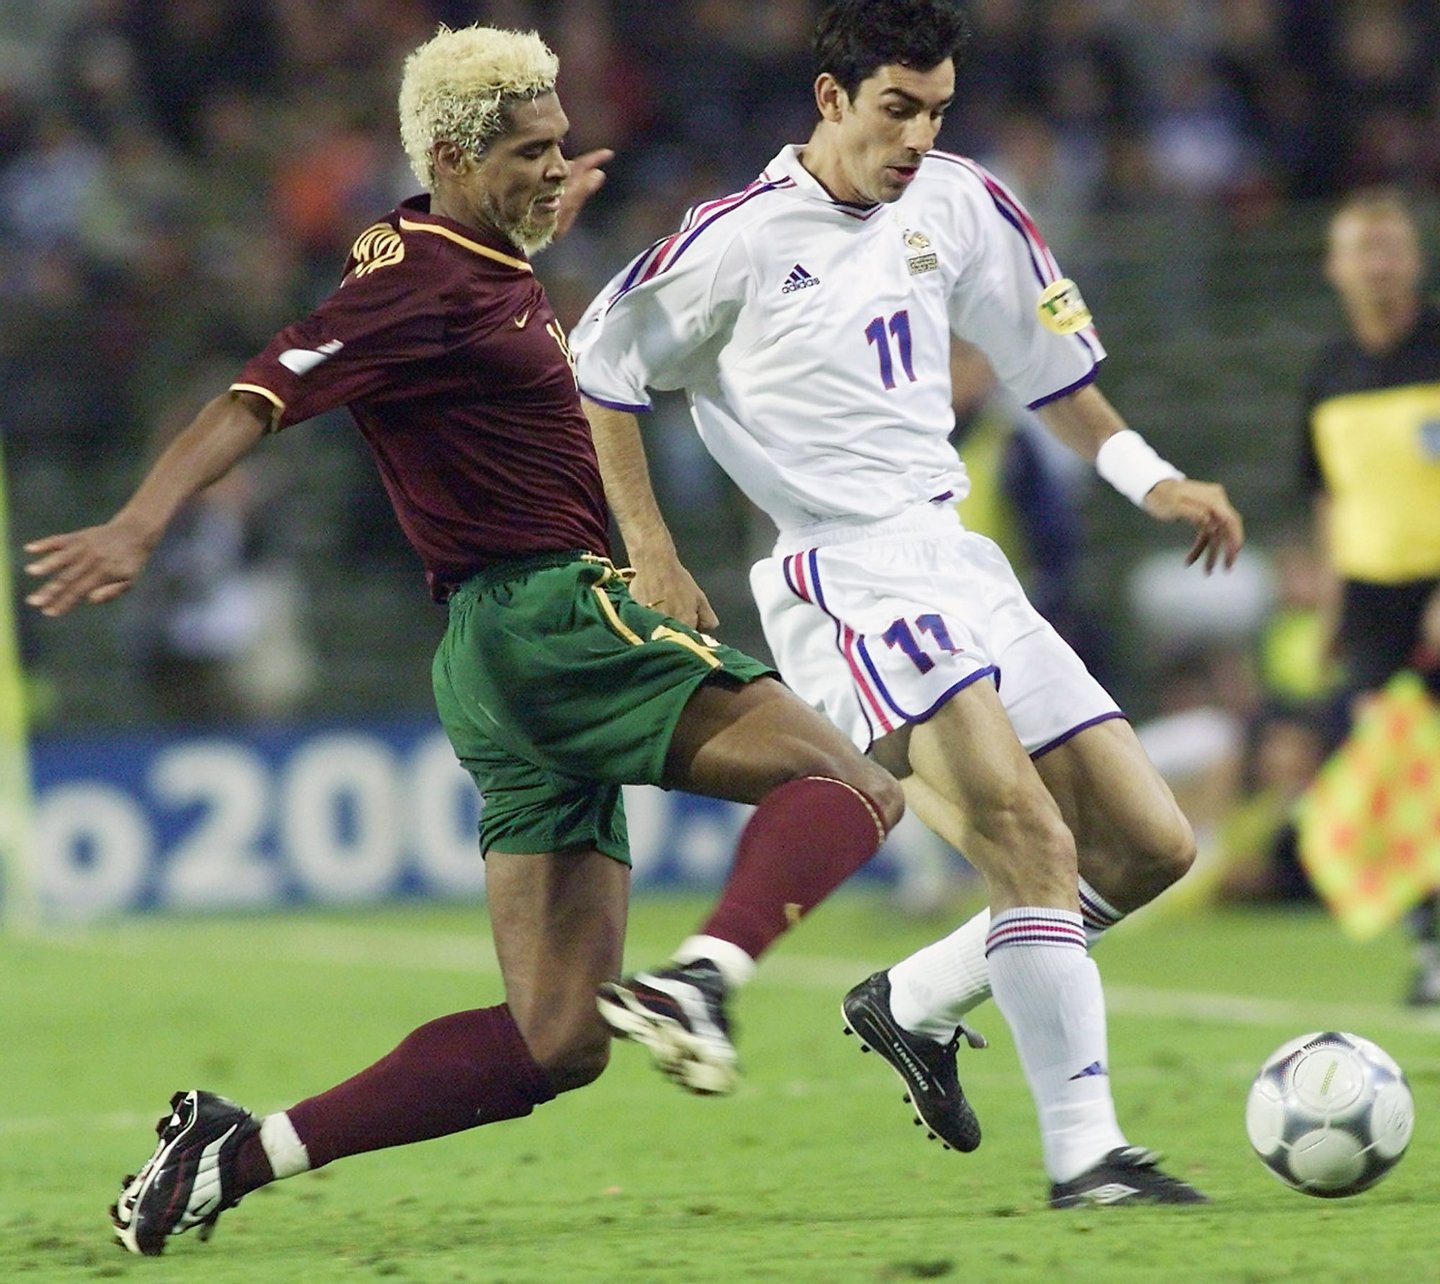 BRUSSELS, BELGIUM: French midfielder Robert Pires (R) tries to avoid the tackle of Portuguese midfielder Abel Xavier during the Euro-2000 semi-final match between Portugal and France at the King Baudouin stadium in Brussels, 28 June 2000. AFP PHOTO/PHILIPPE HUGUEN (Photo credit should read PHILIPPE HUGUEN/AFP/Getty Images)